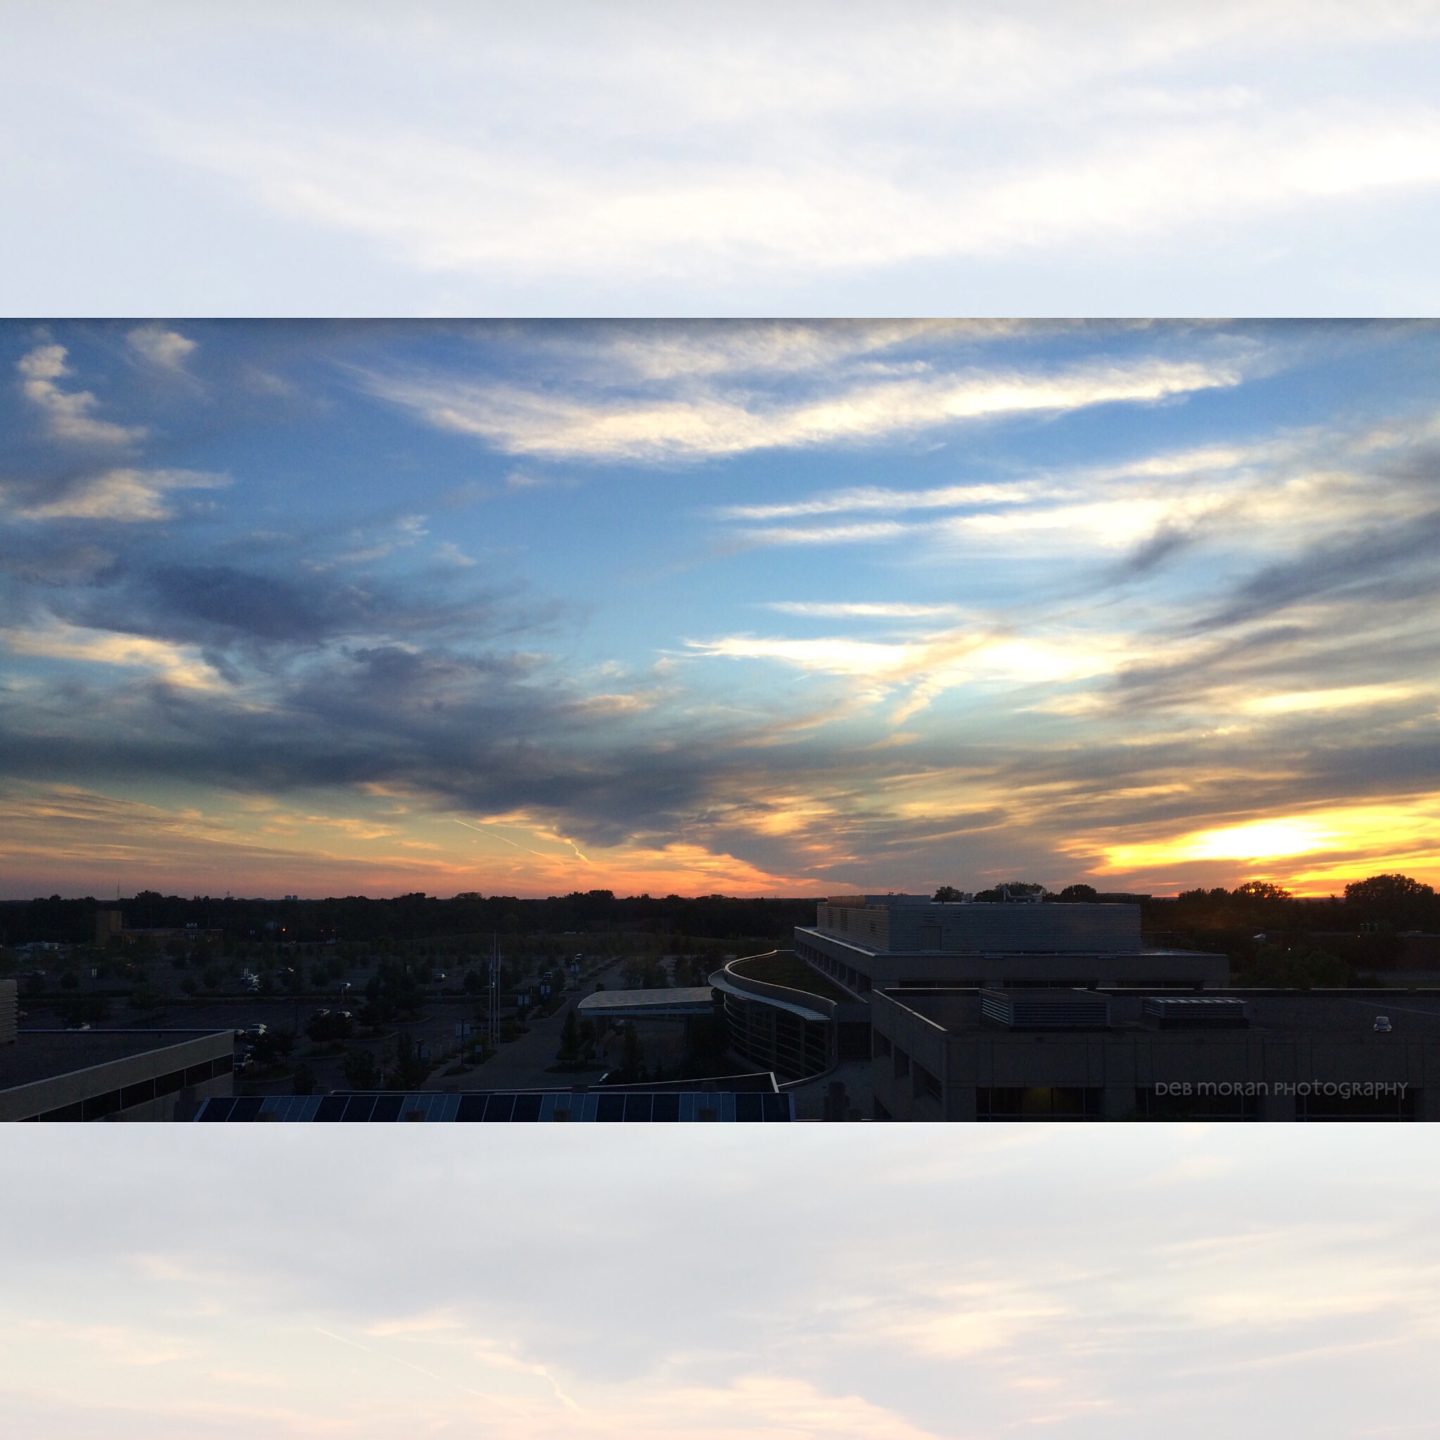 Sunset, Day 2 – August 4, 2015